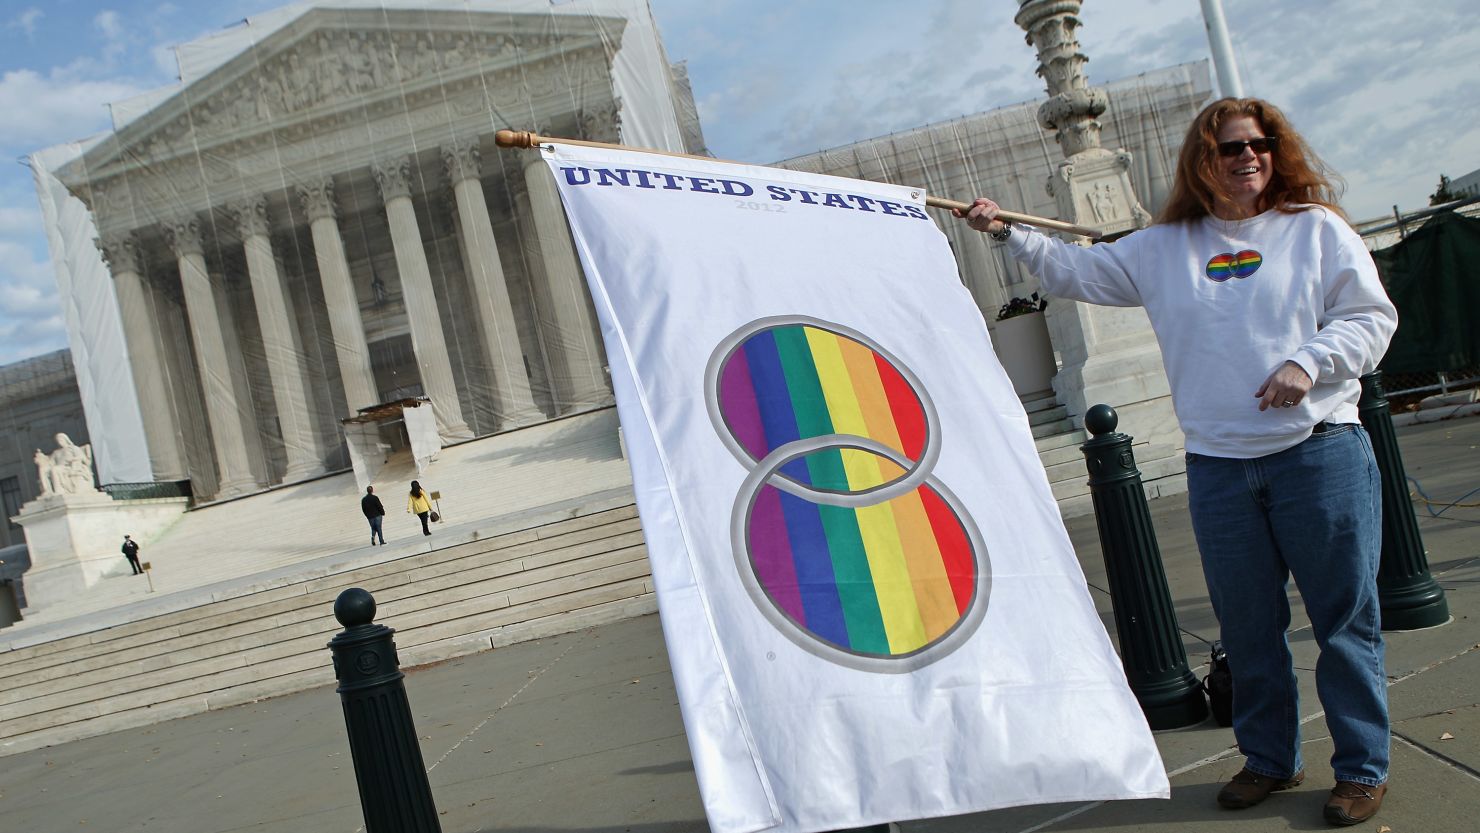 Tim Stanley predicts gay marriage will be front and center this summer when the Supreme Court takes up the issue.